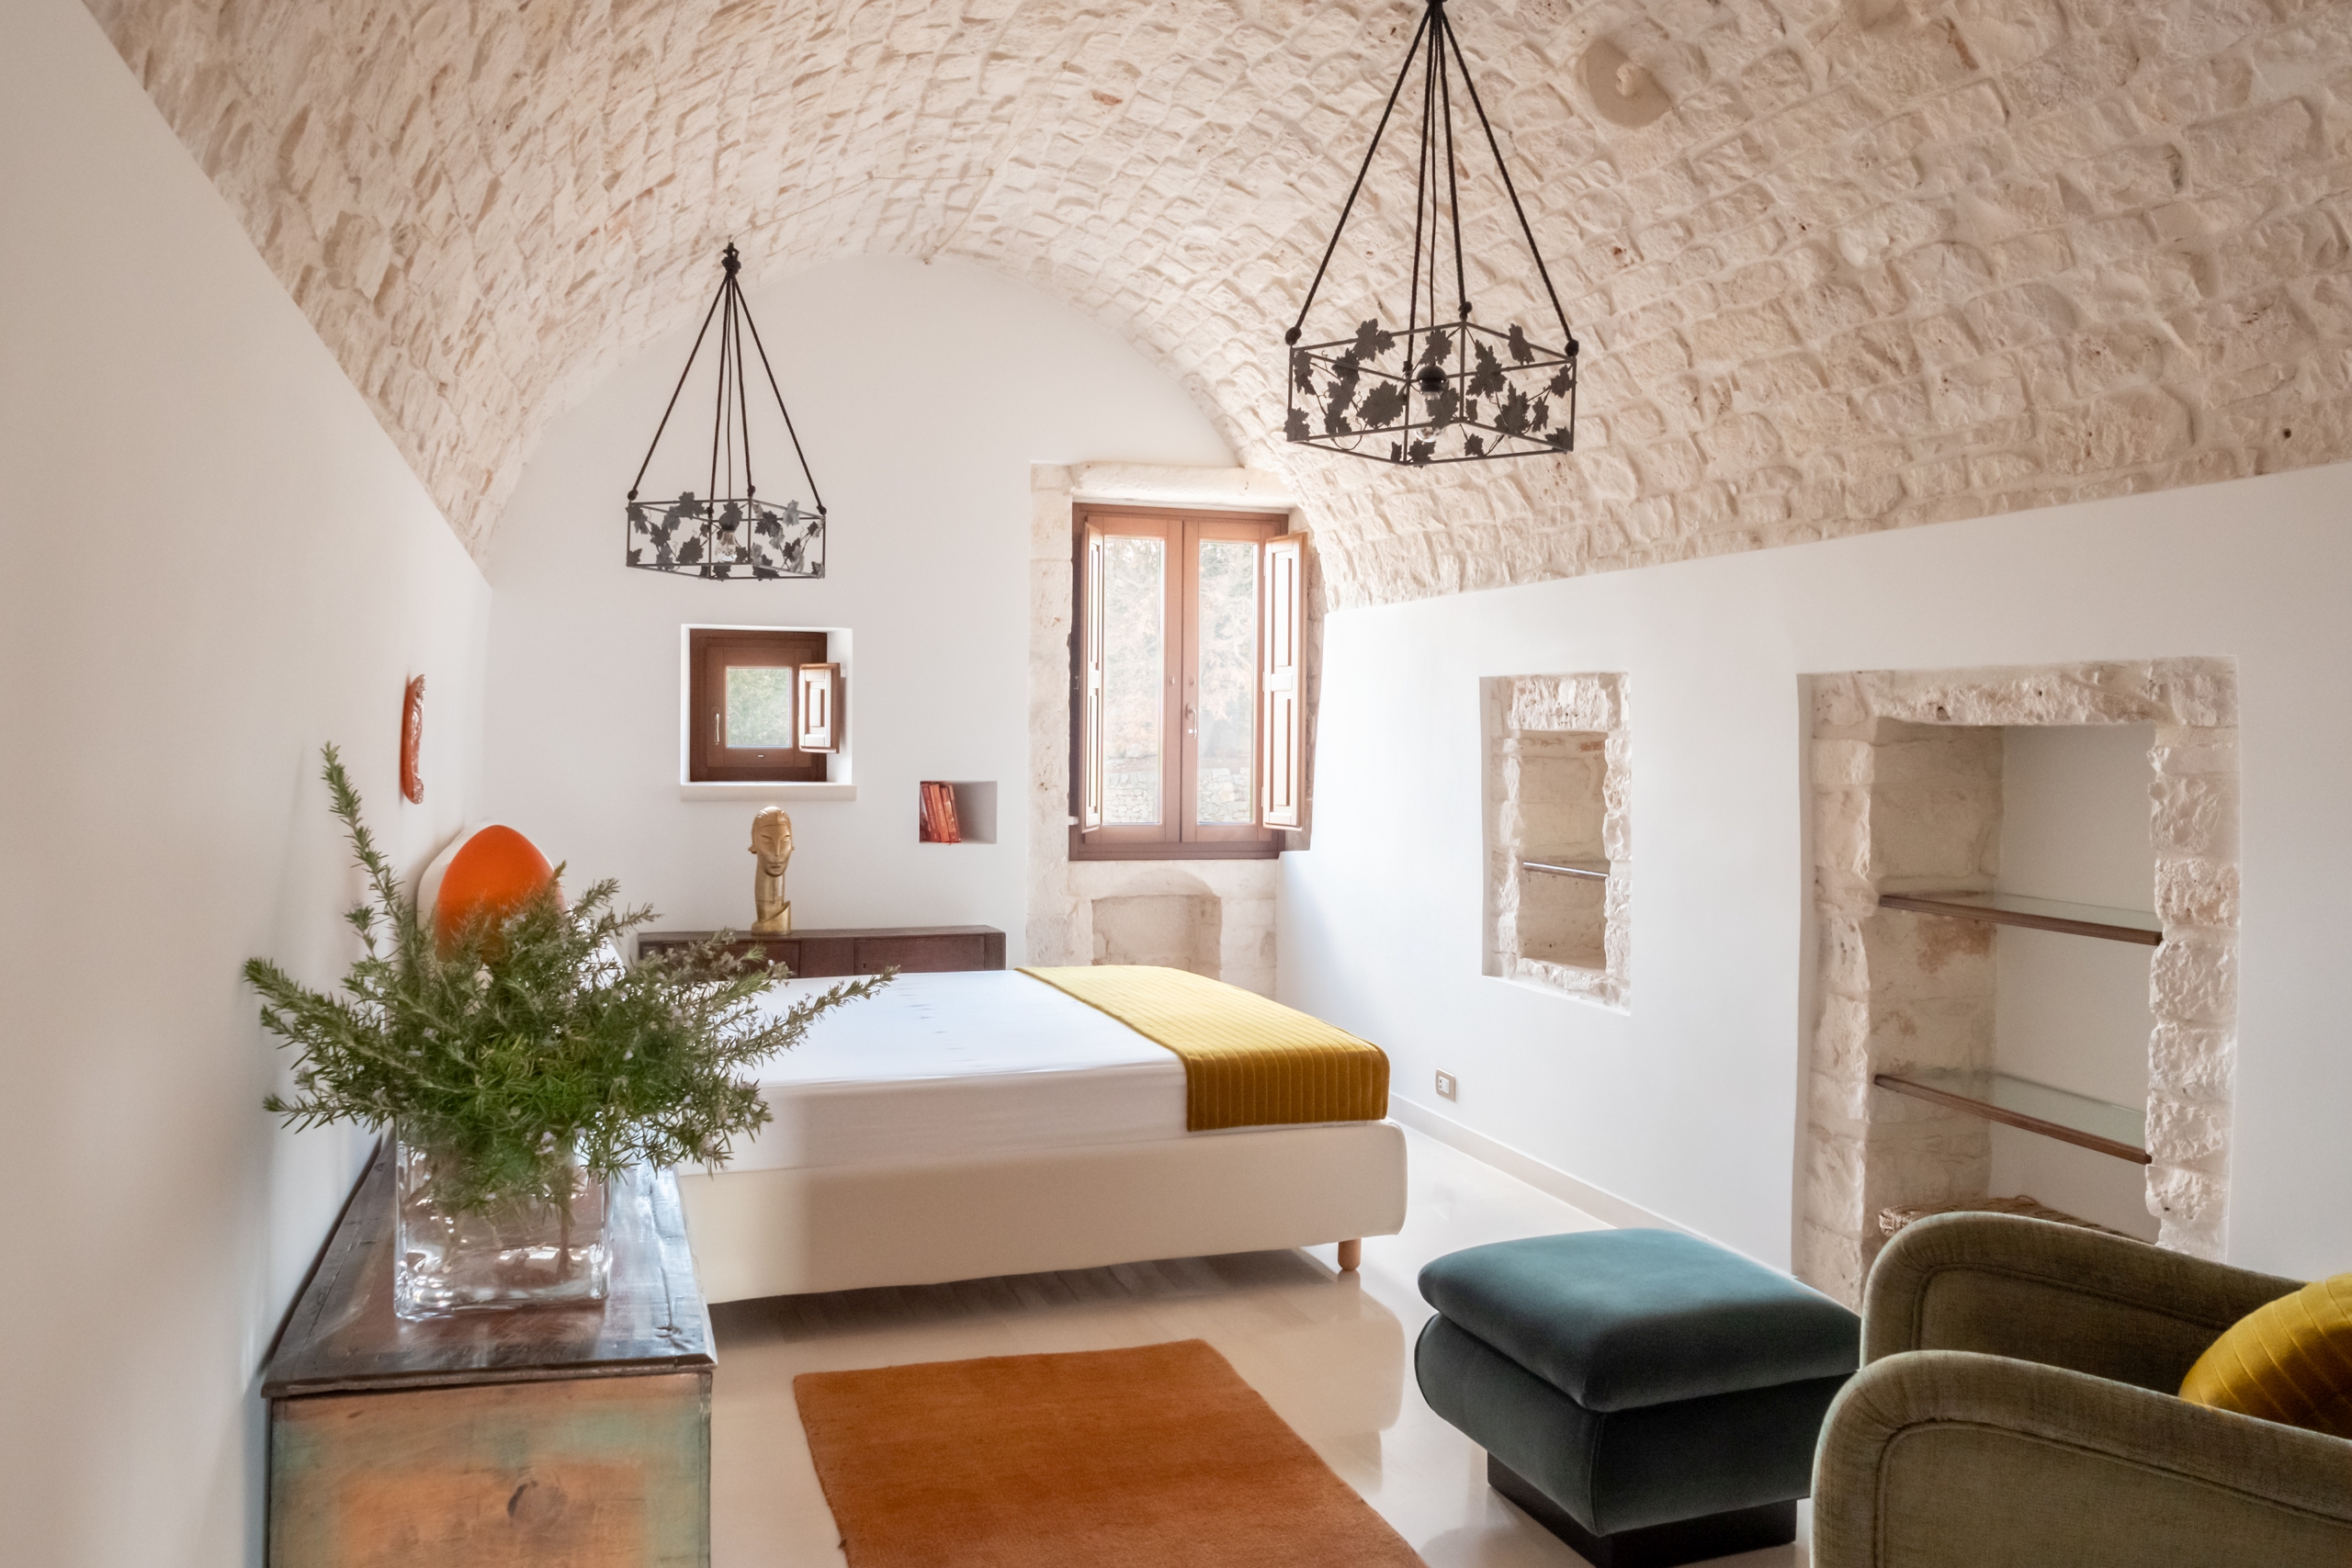 Airy and cosy, a bedroom that keeps an ancient machicolation still intact.